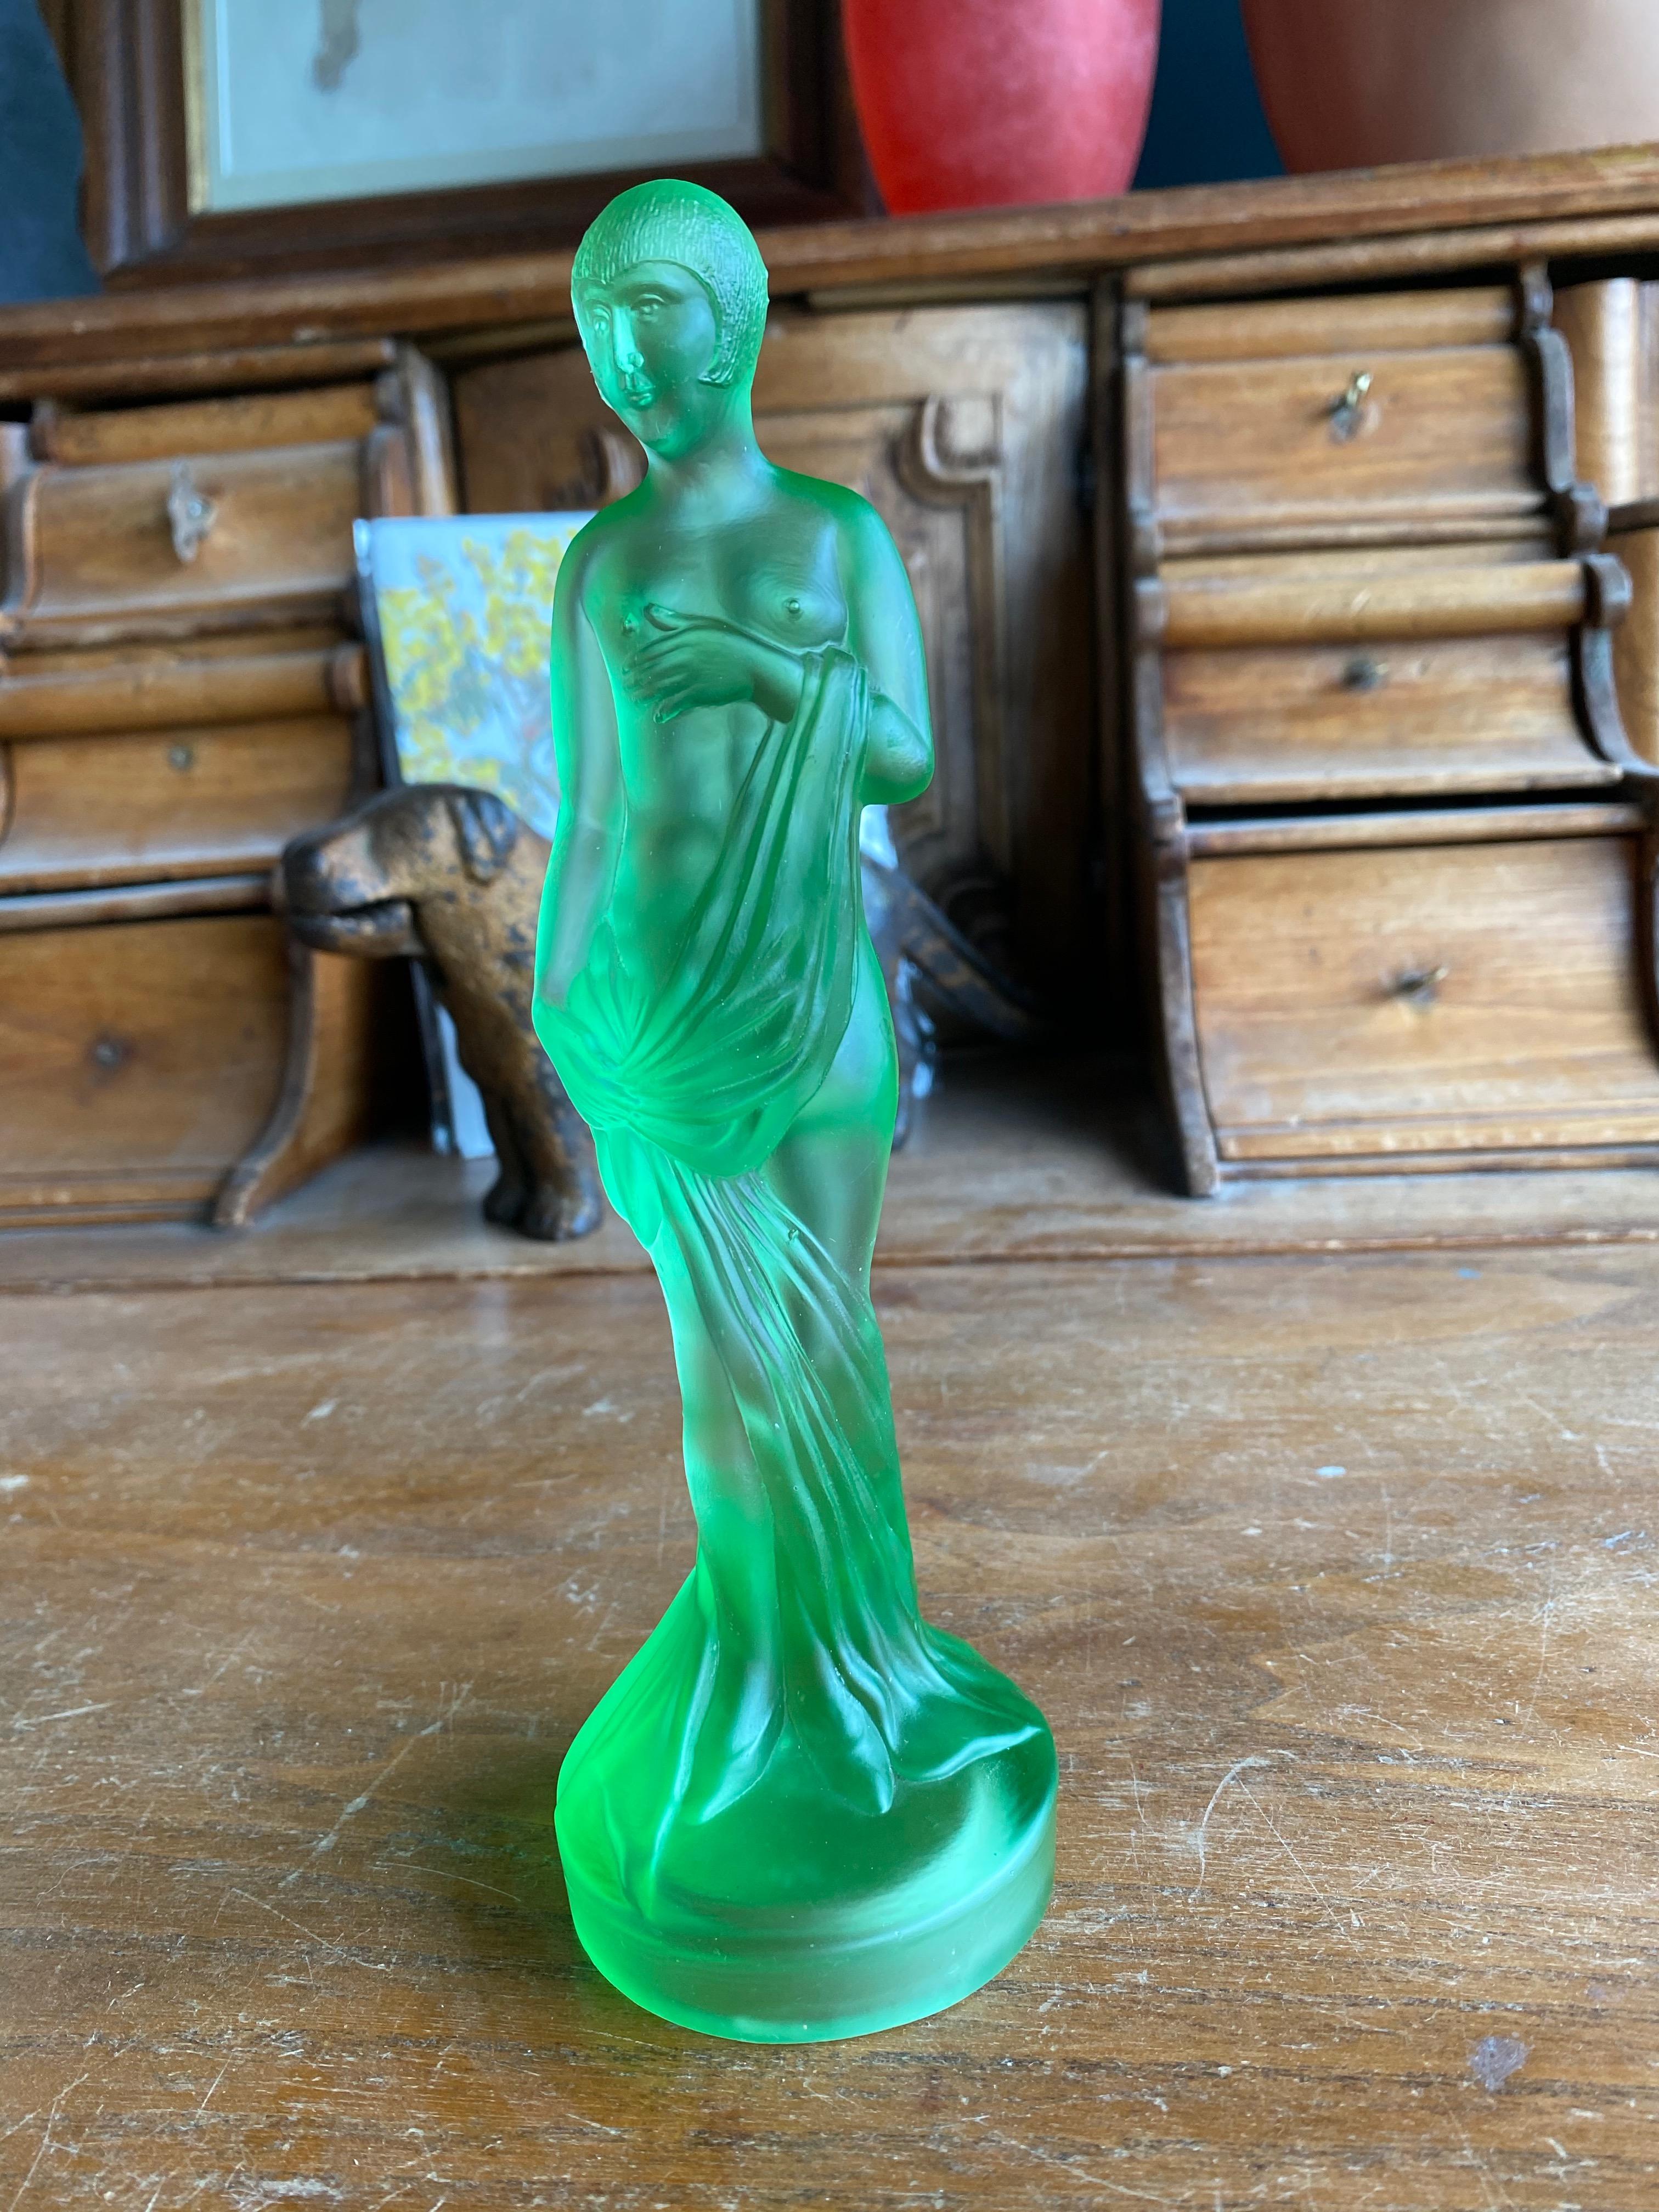 Decorative glass figurine of a 1920s lady. The figure is made of green satin pressed glass and looks good on any shelf, windowsill or even as a table decoration.

The foot is slightly bumped (see photo).